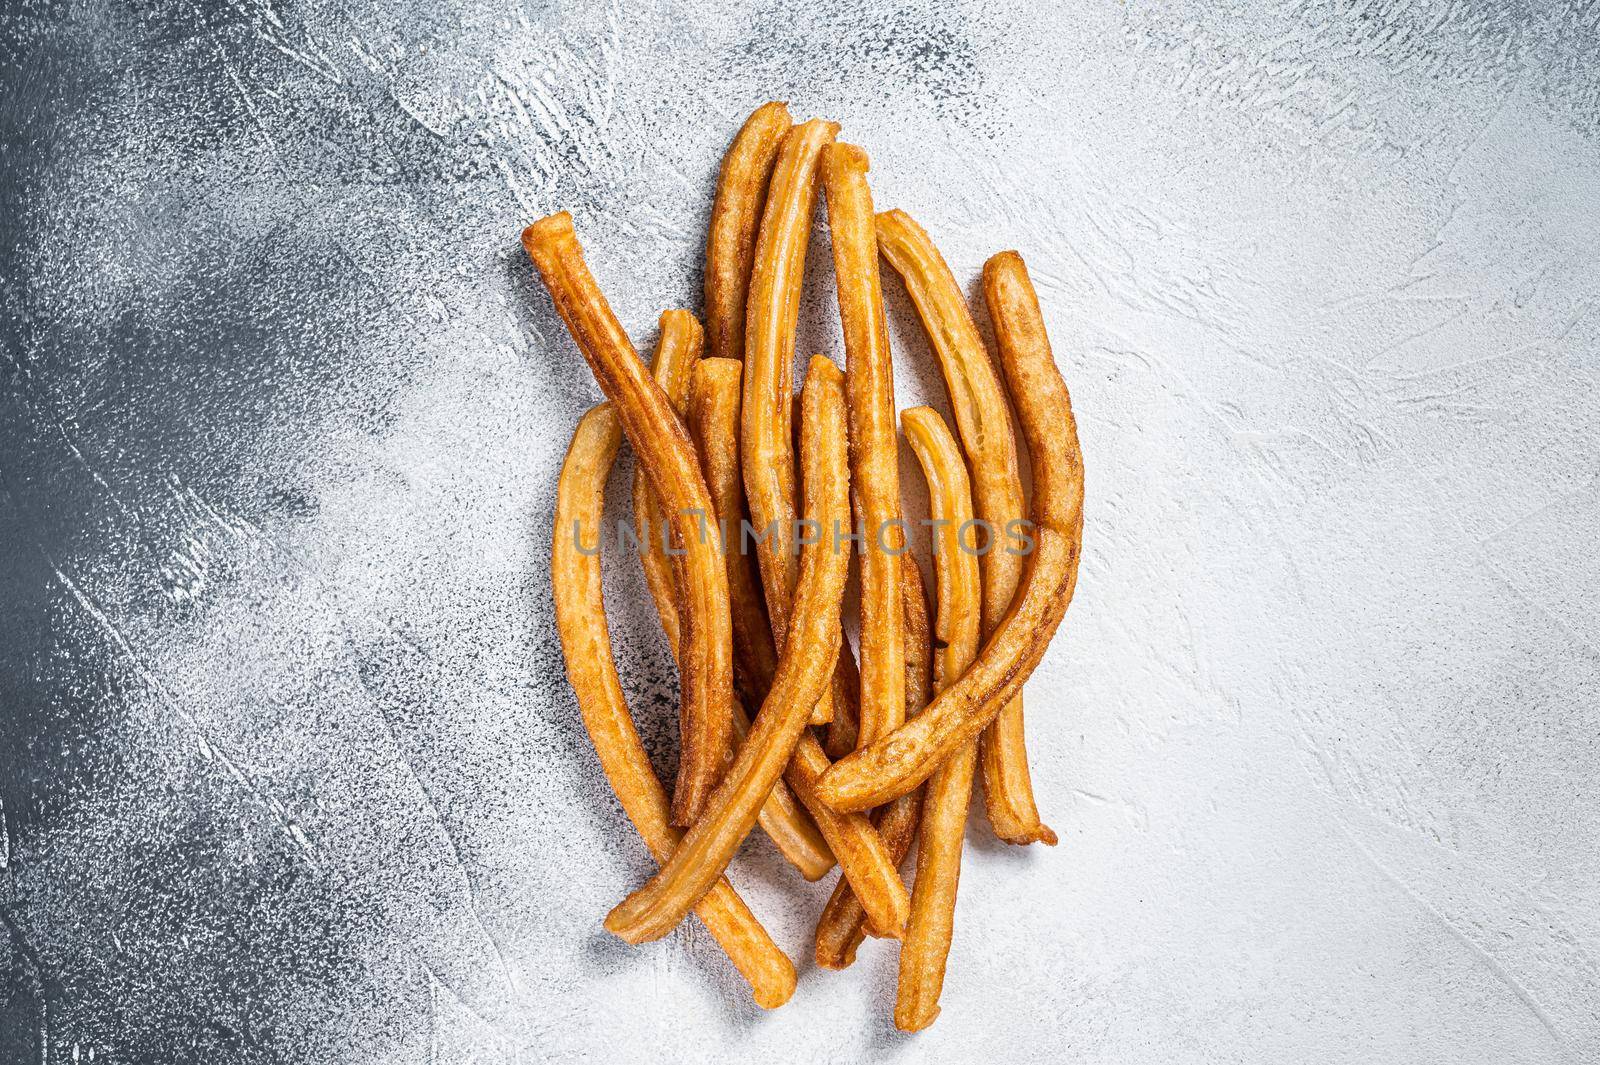 Churros fried sticks on kitchen table. White background. Top view.